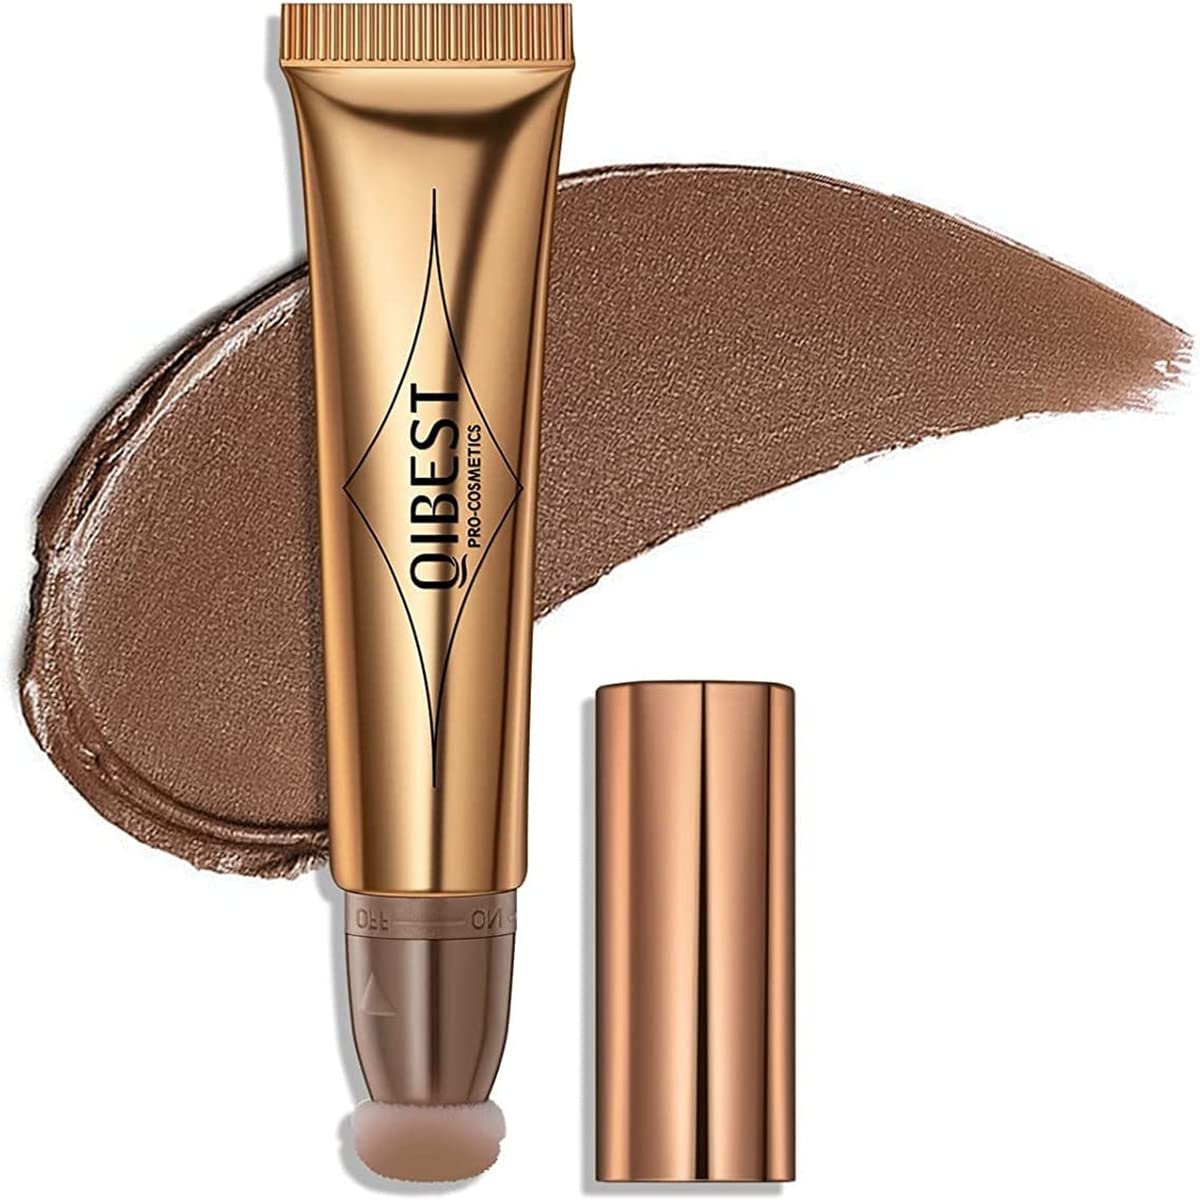 searcher Liquid Contour Beauty Wall, Face Highlighter and Bronze Stick with Cushion Applicator, Shimmer Long Lasting Silky Cream Face Highlighter Bronze Makeup Stick (01# Taupe Brown)